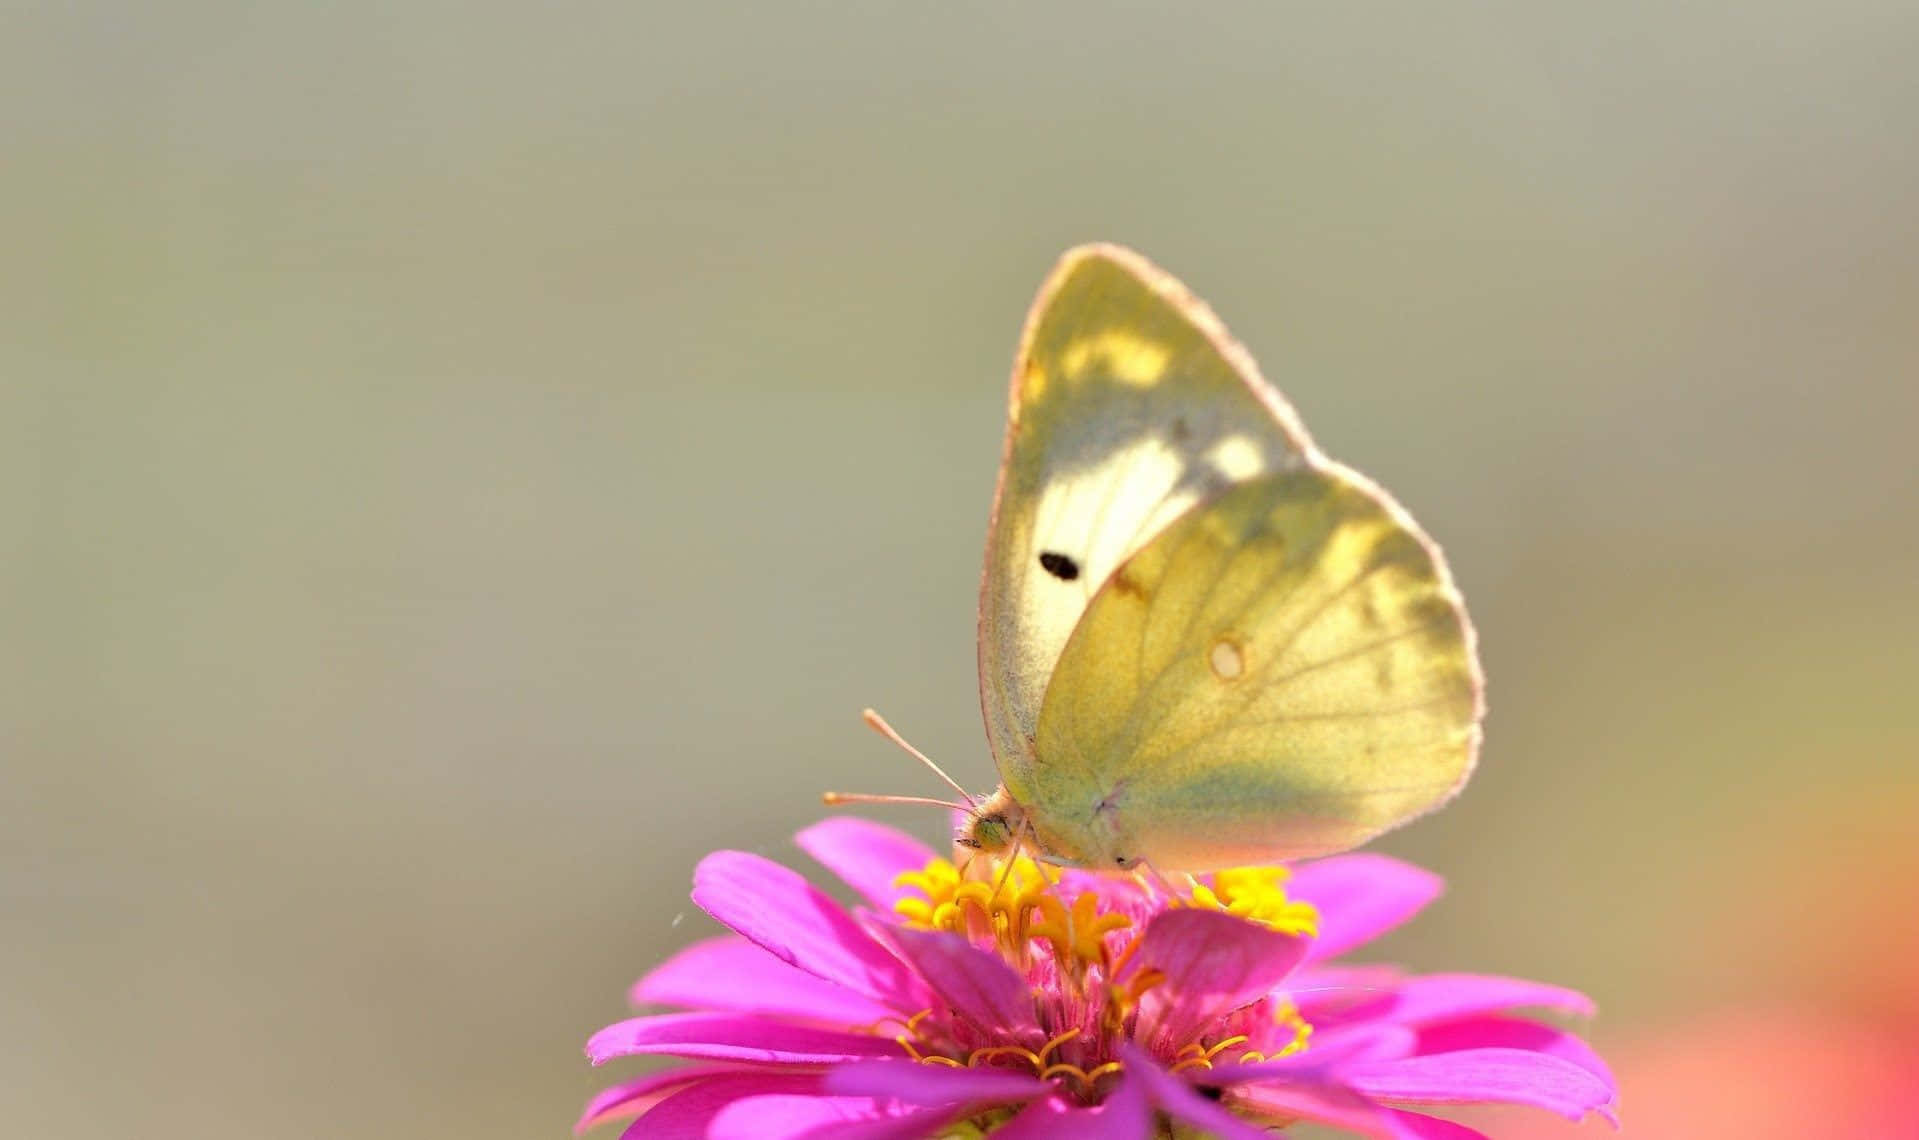 A vibrant yellow butterfly in nature Wallpaper